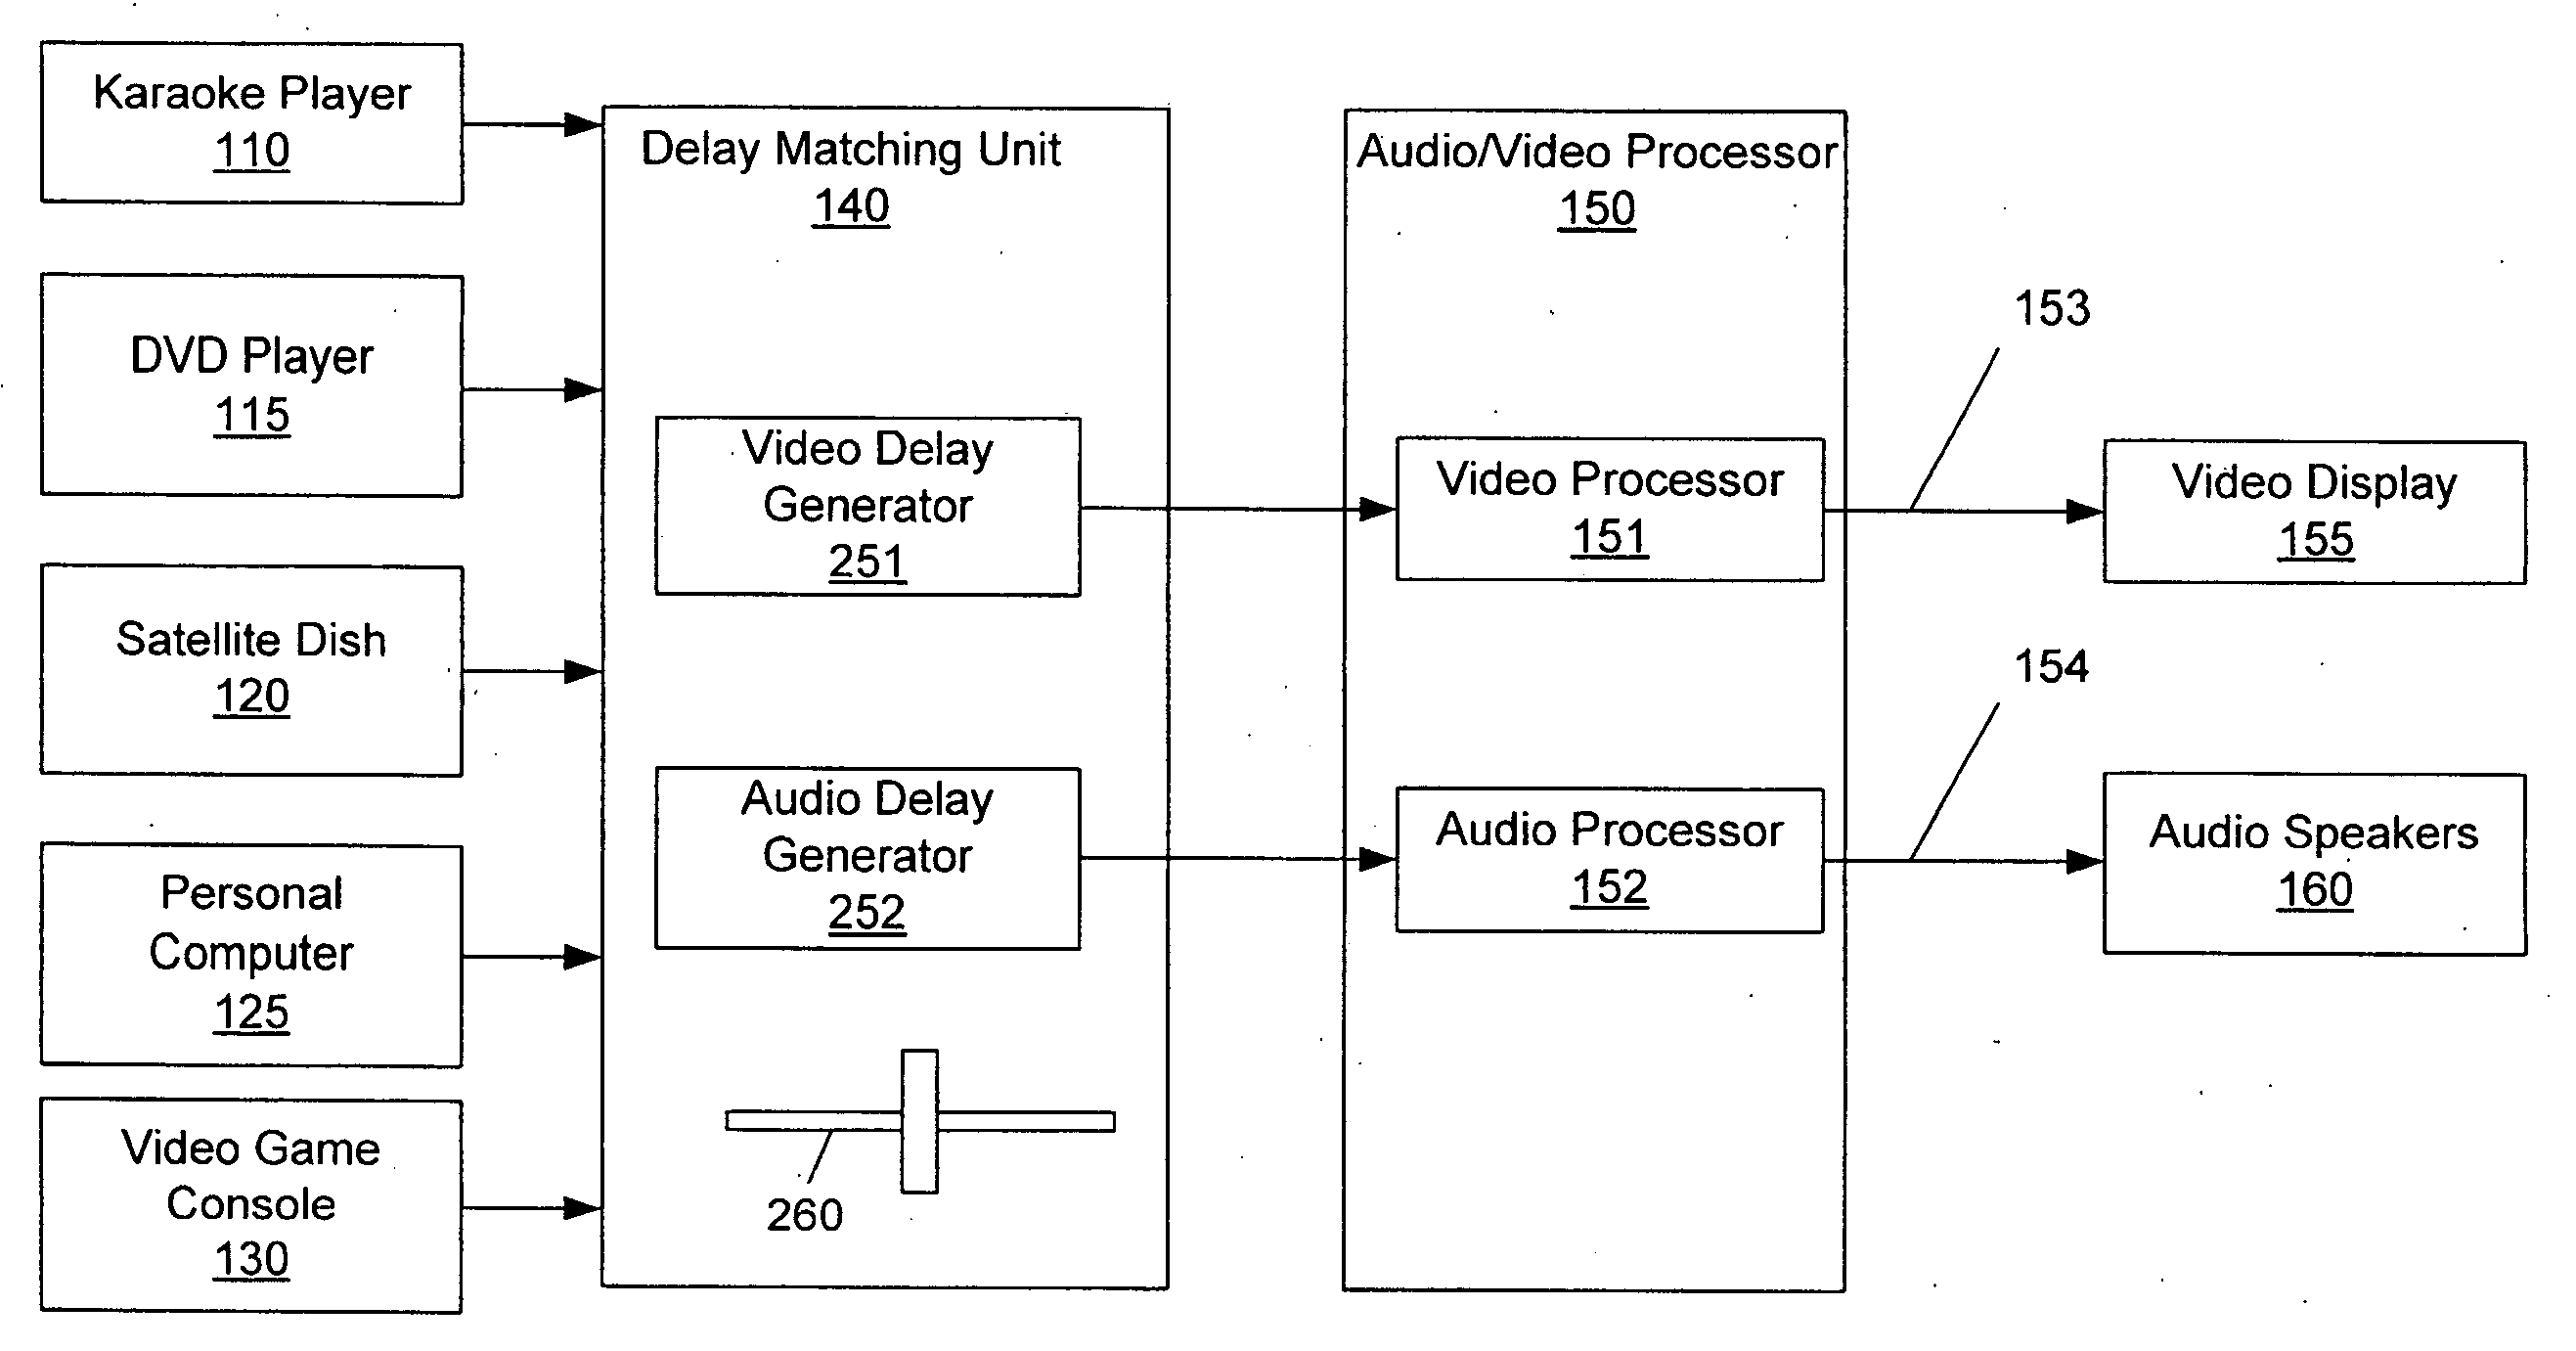 Delay matching in audio/video systems